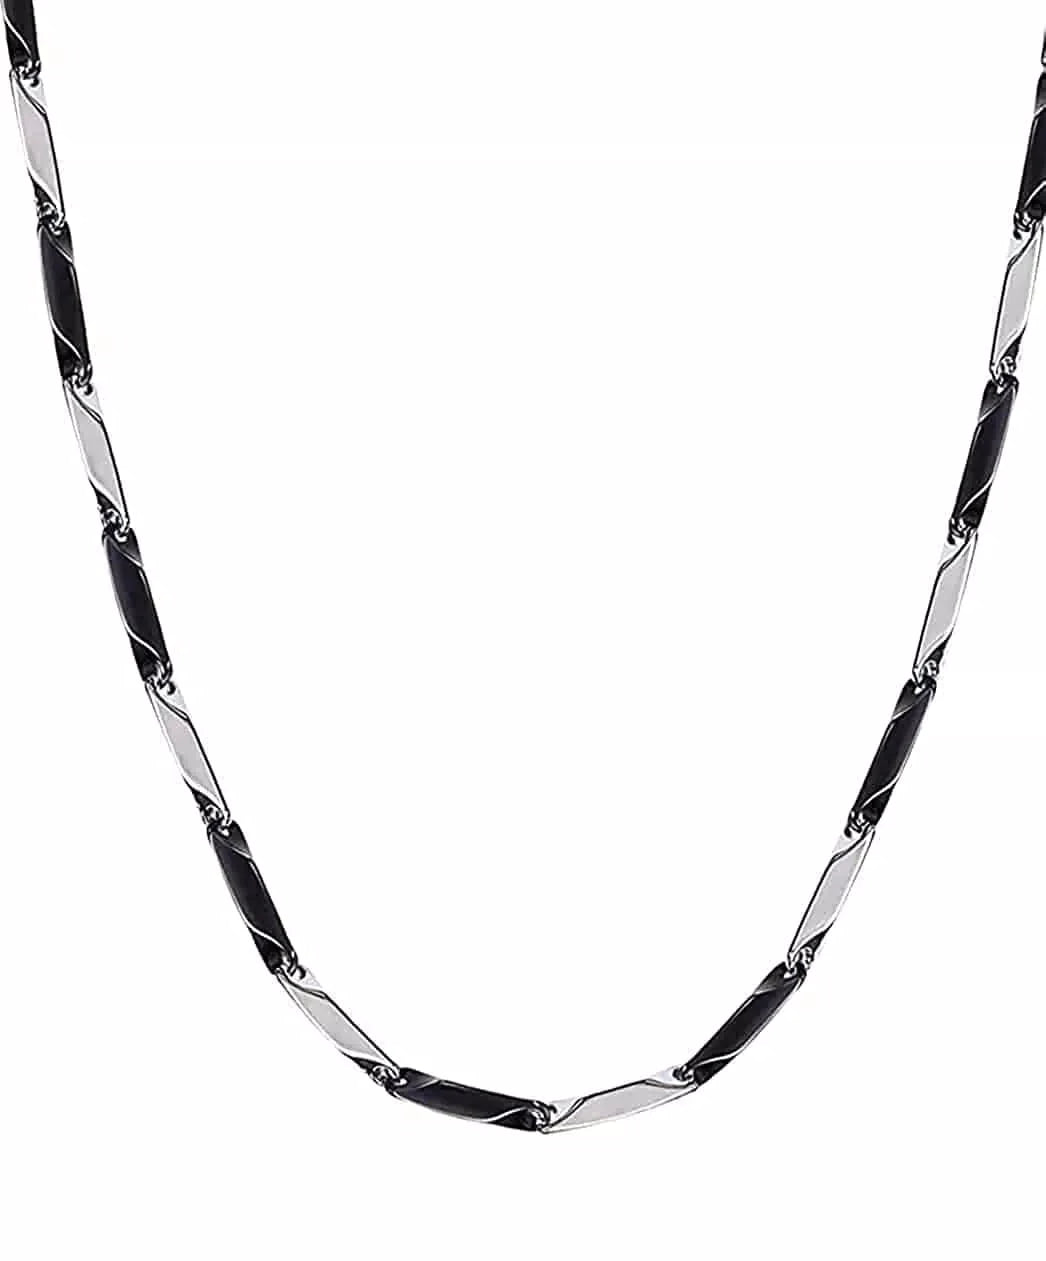 THE MEN THING Pure Stainless Steel Black Silver Rice Chain 20inch - European Trending Style - Necklace for Men & Boy